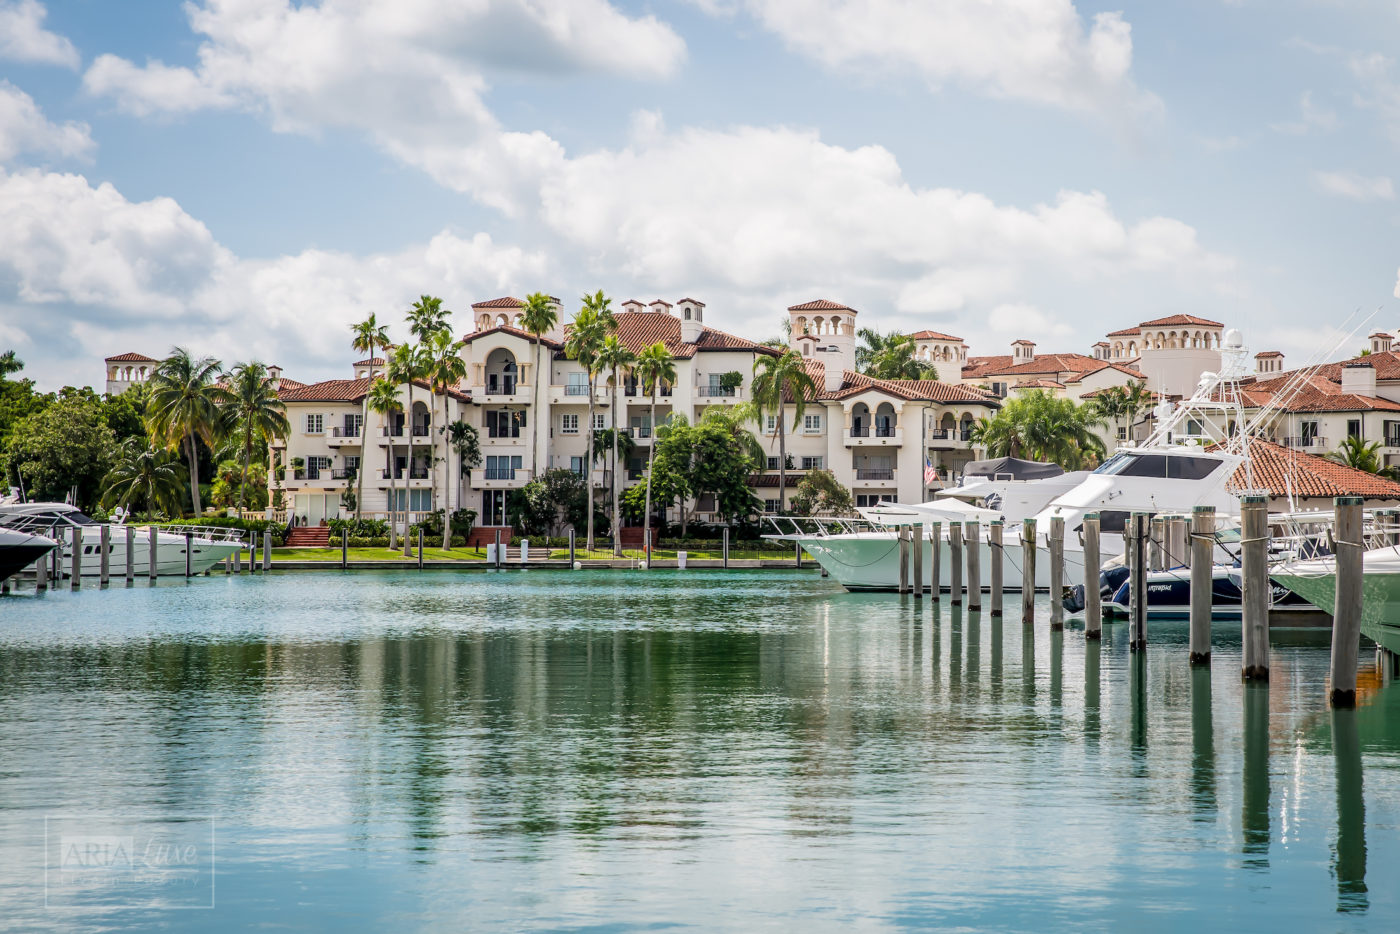 Fisher Island Q1 2020 Real Estate Report